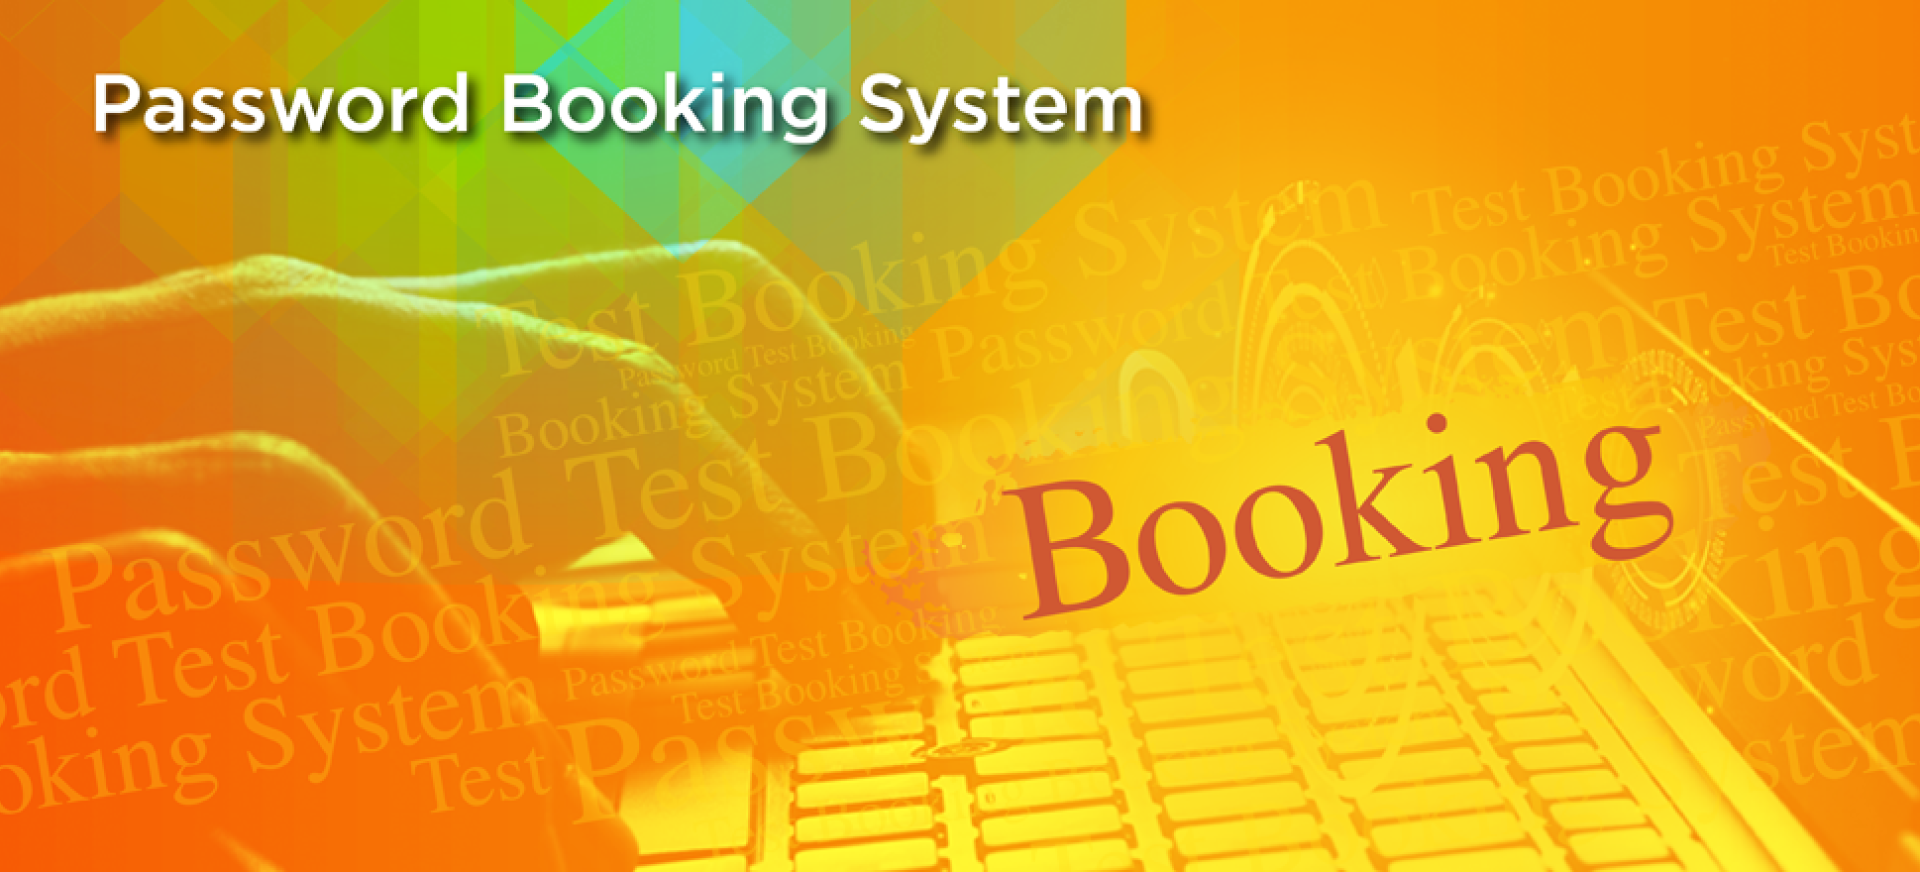 Password Test Booking System